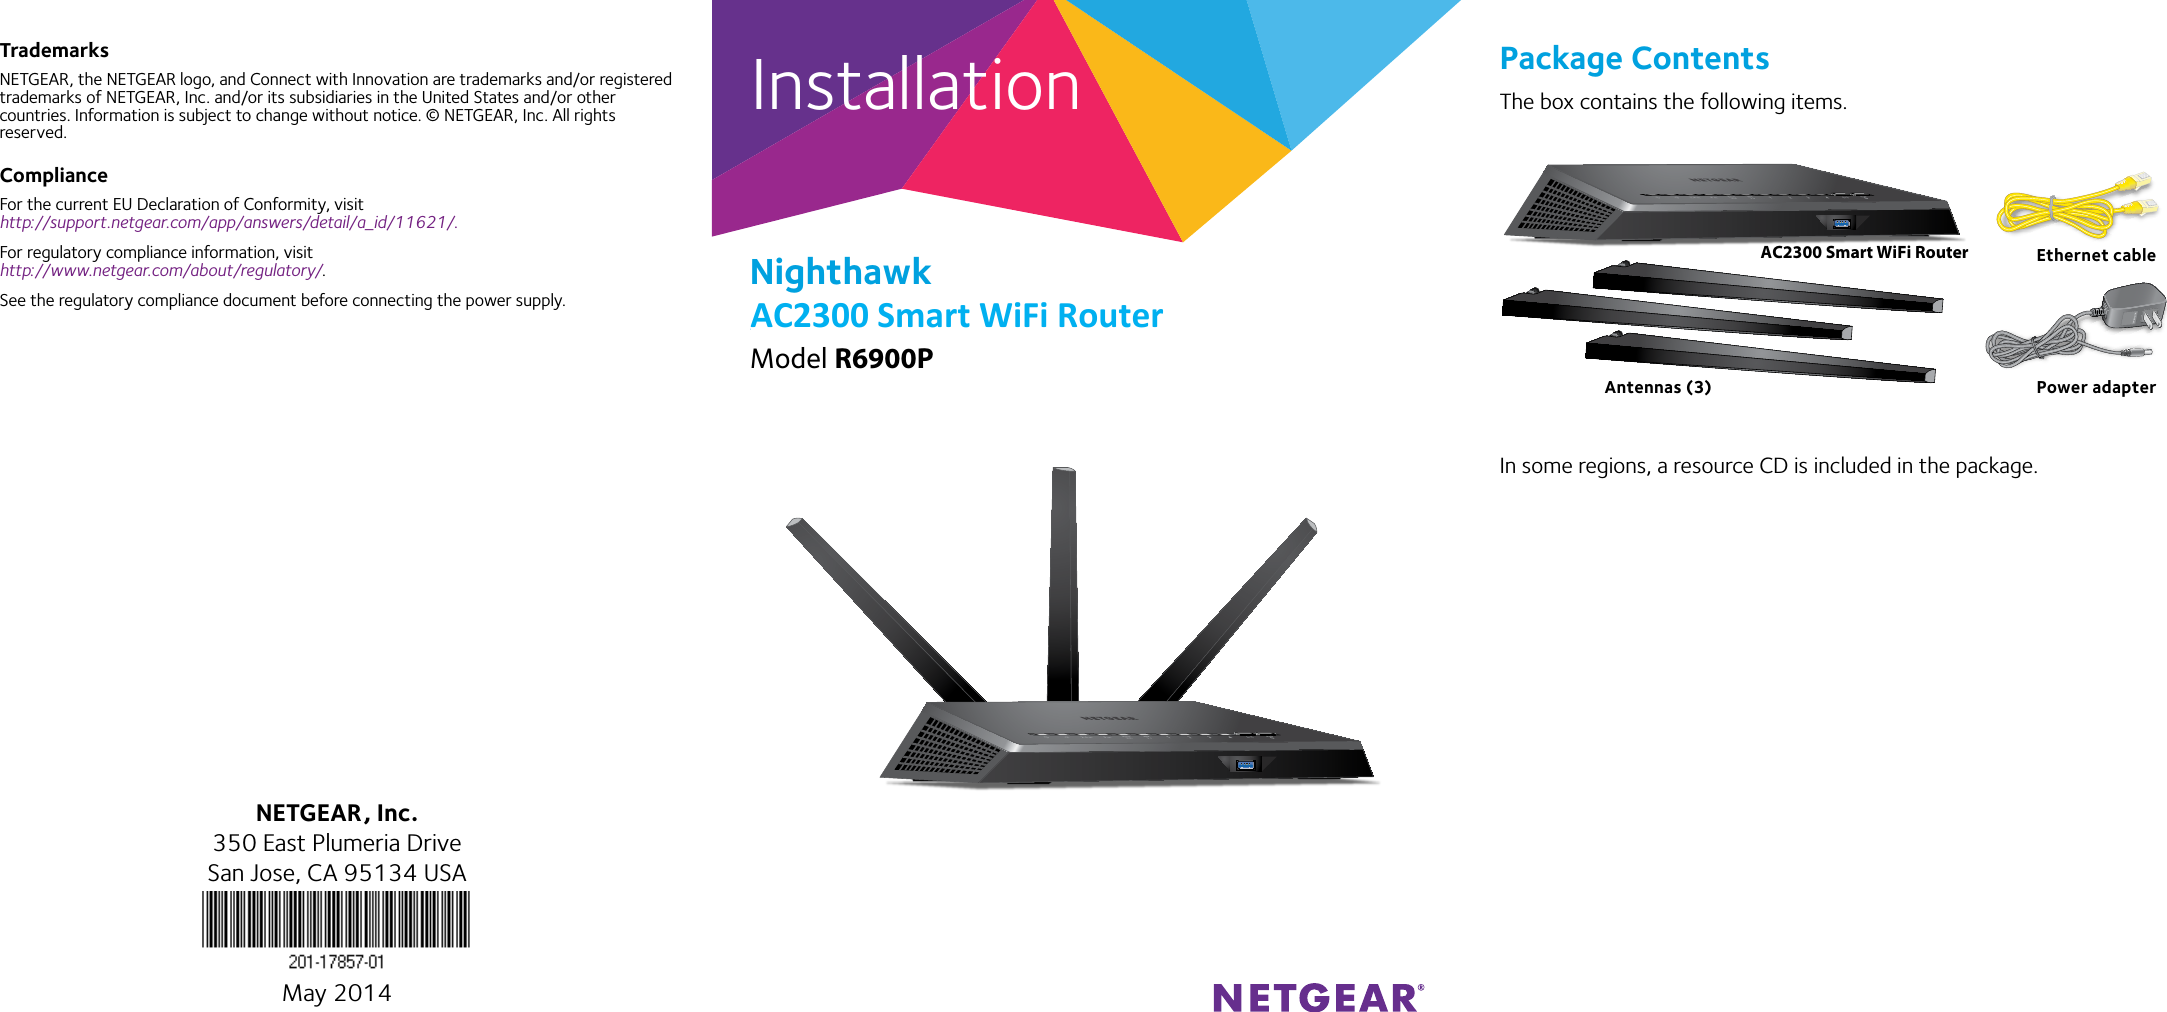 InstallationNighthawk AC1750 Smart WiFi RouterModel R6700TrademarksNETGEAR, the NETGEAR logo, and Connect with Innovation are trademarks and/or registered trademarks of NETGEAR, Inc. and/or its subsidiaries in the United States and/or other countries. Information is subject to change without notice. © NETGEAR, Inc. All rights reserved.ComplianceFor the current EU Declaration of Conformity, visit  http://support.netgear.com/app/answers/detail/a_id/11621/. For regulatory compliance information, visit http://www.netgear.com/about/regulatory/.See the regulatory compliance document before connecting the power supply.Package ContentsThe box contains the following items.In some regions, a resource CD is included in the package.NETGEAR, Inc.350 East Plumeria DriveSan Jose, CA 95134 USAMay 2014AC1750 Smart WiFi Router Ethernet cablePower adapterAntennas (3)R6900PAC2300 Smart WiFi RouterAC2300 Smart WiFi Router